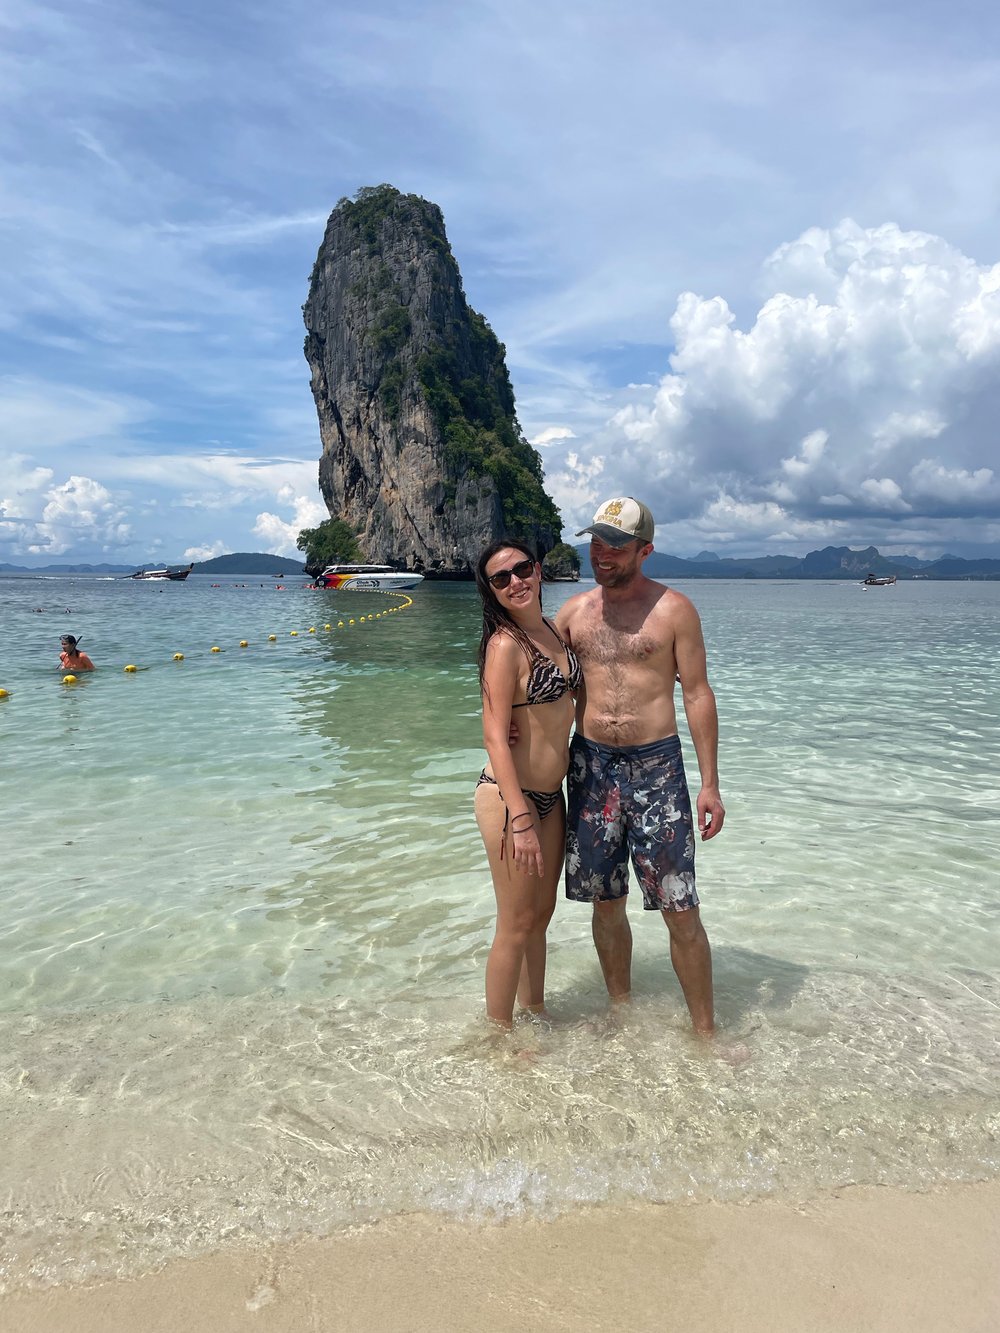 Boat tour to the nearby islands of Koh Poda and Thale Waek